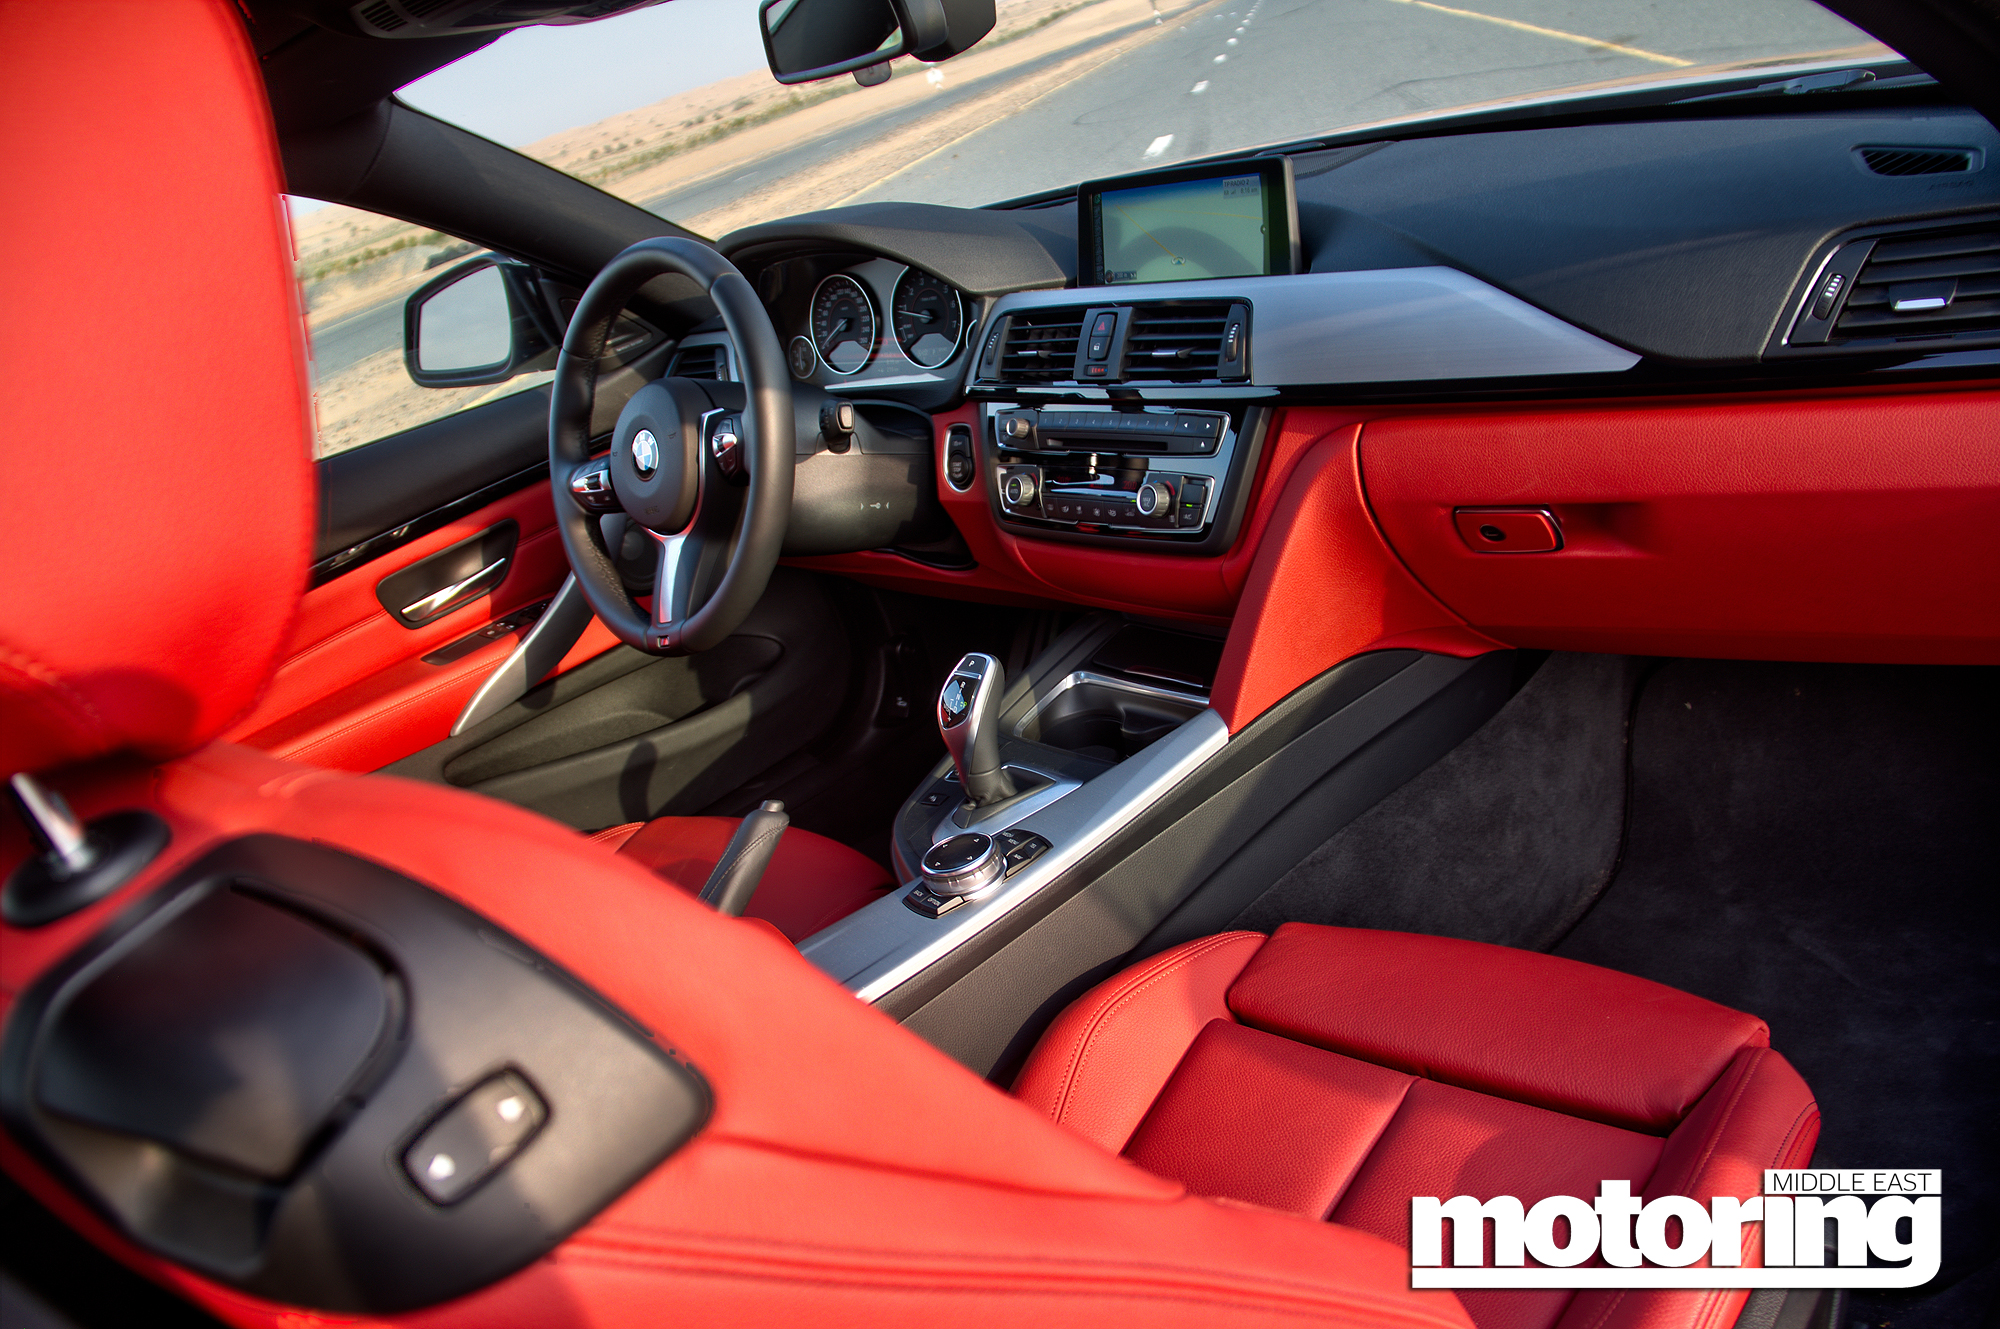 2014 Bmw 435i Reviewmotoring Middle East Car News Reviews